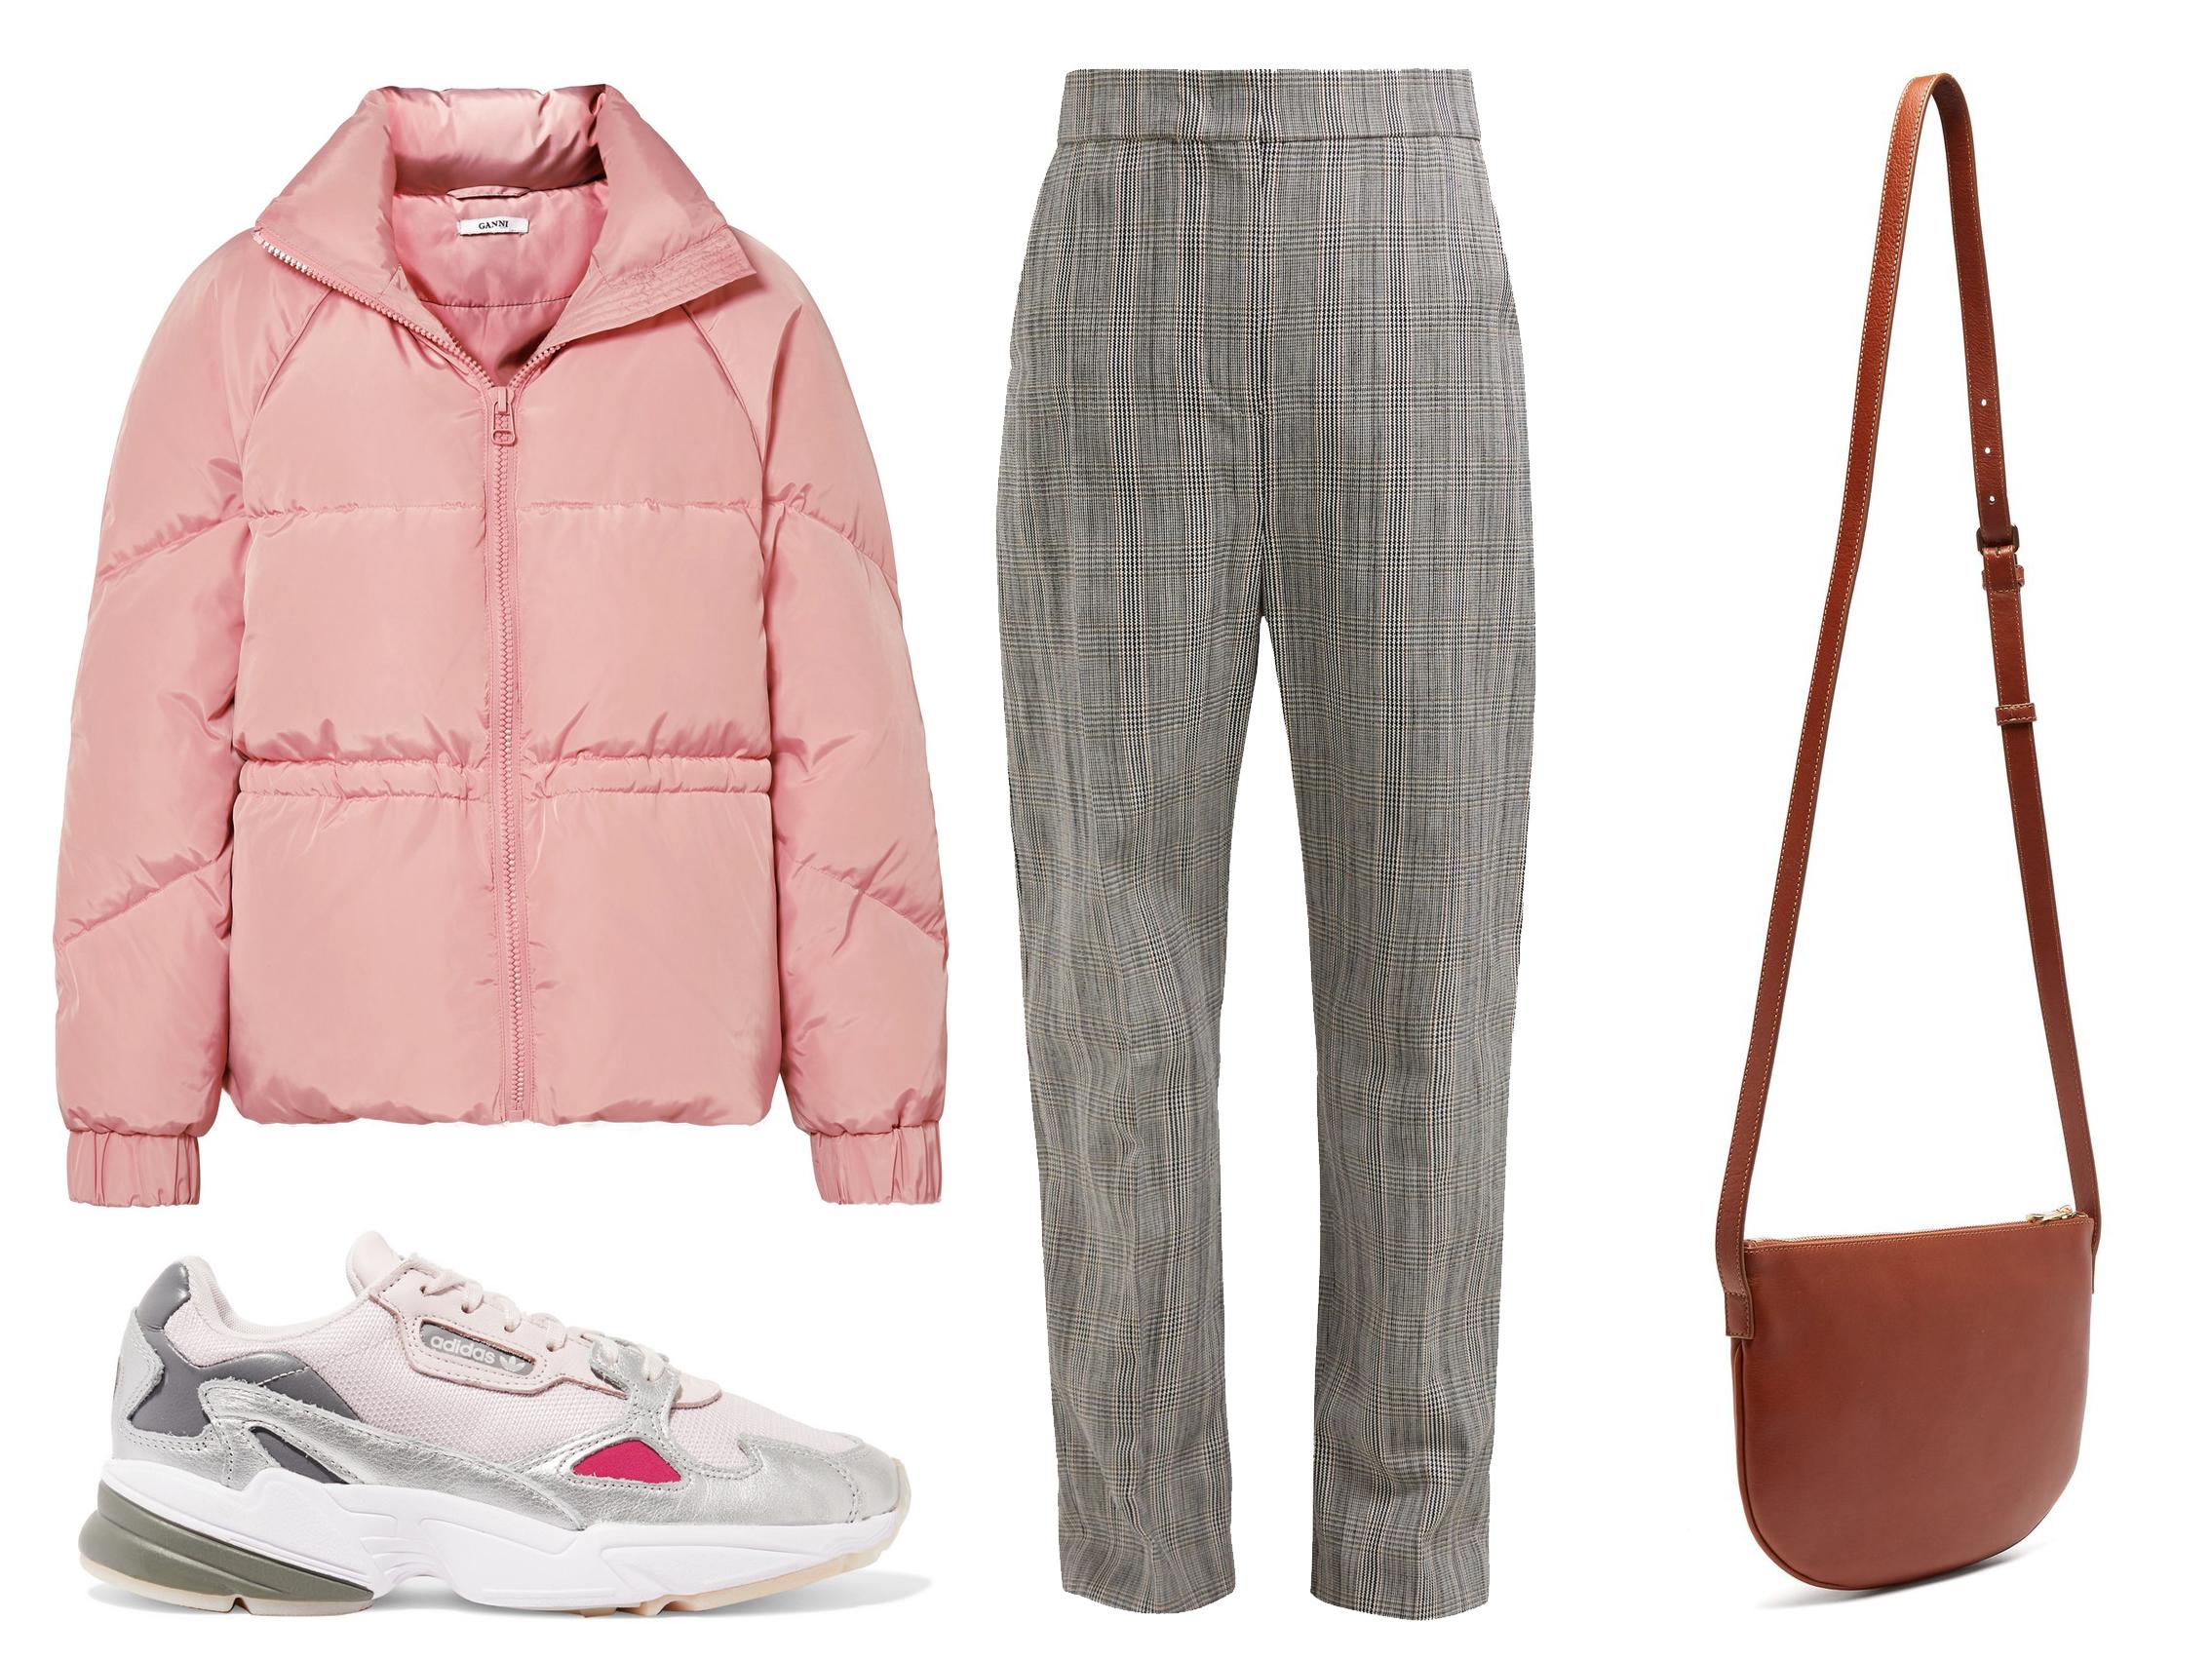 Ganni Whitman quilted shell down jacket: £300, Adidas Originals falcon mesh, suede and metallic leather sneakers: £85, Joseph Haim houndstooth-check cotton-blend trousers: £345, APC Maelys half-moon leather cross-body bag: £205.